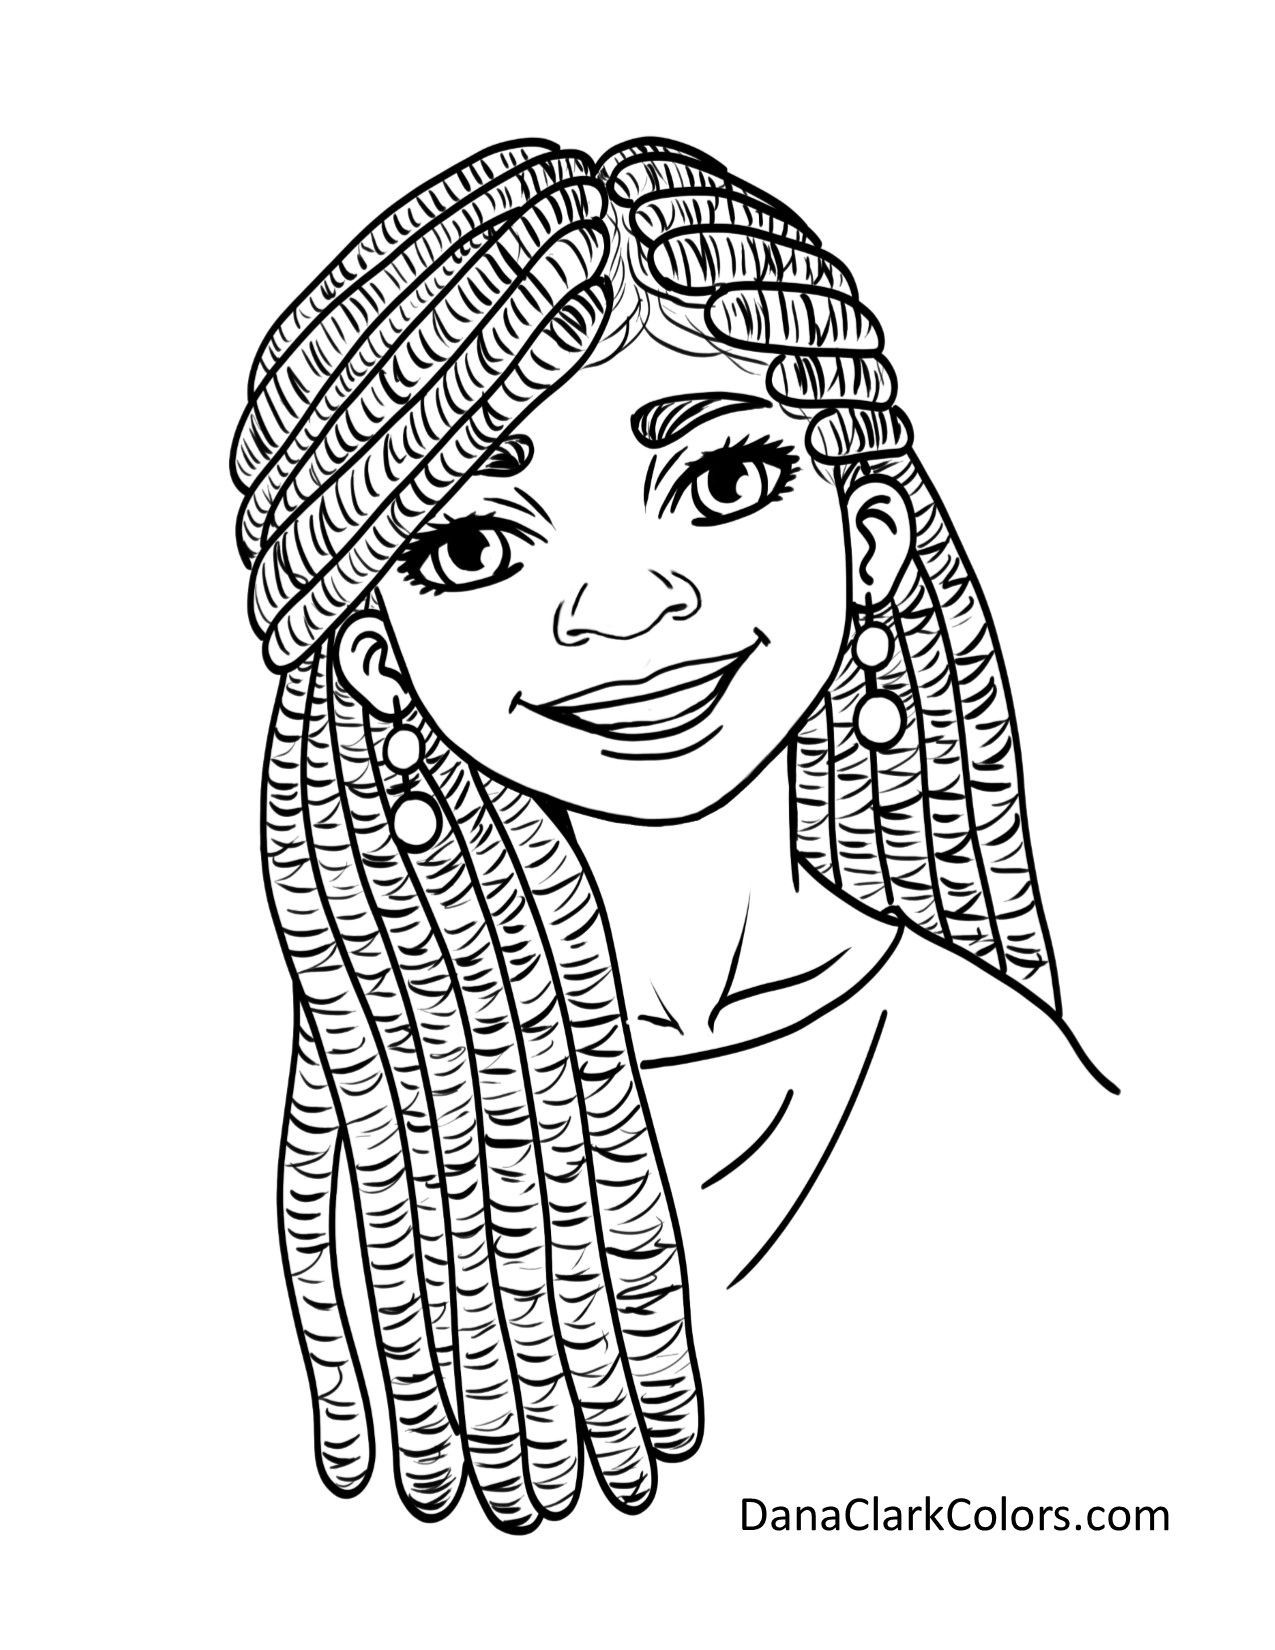 African American Boys Coloring Sheets
 Black Kids coloring page AfricanAmericanColoringPage